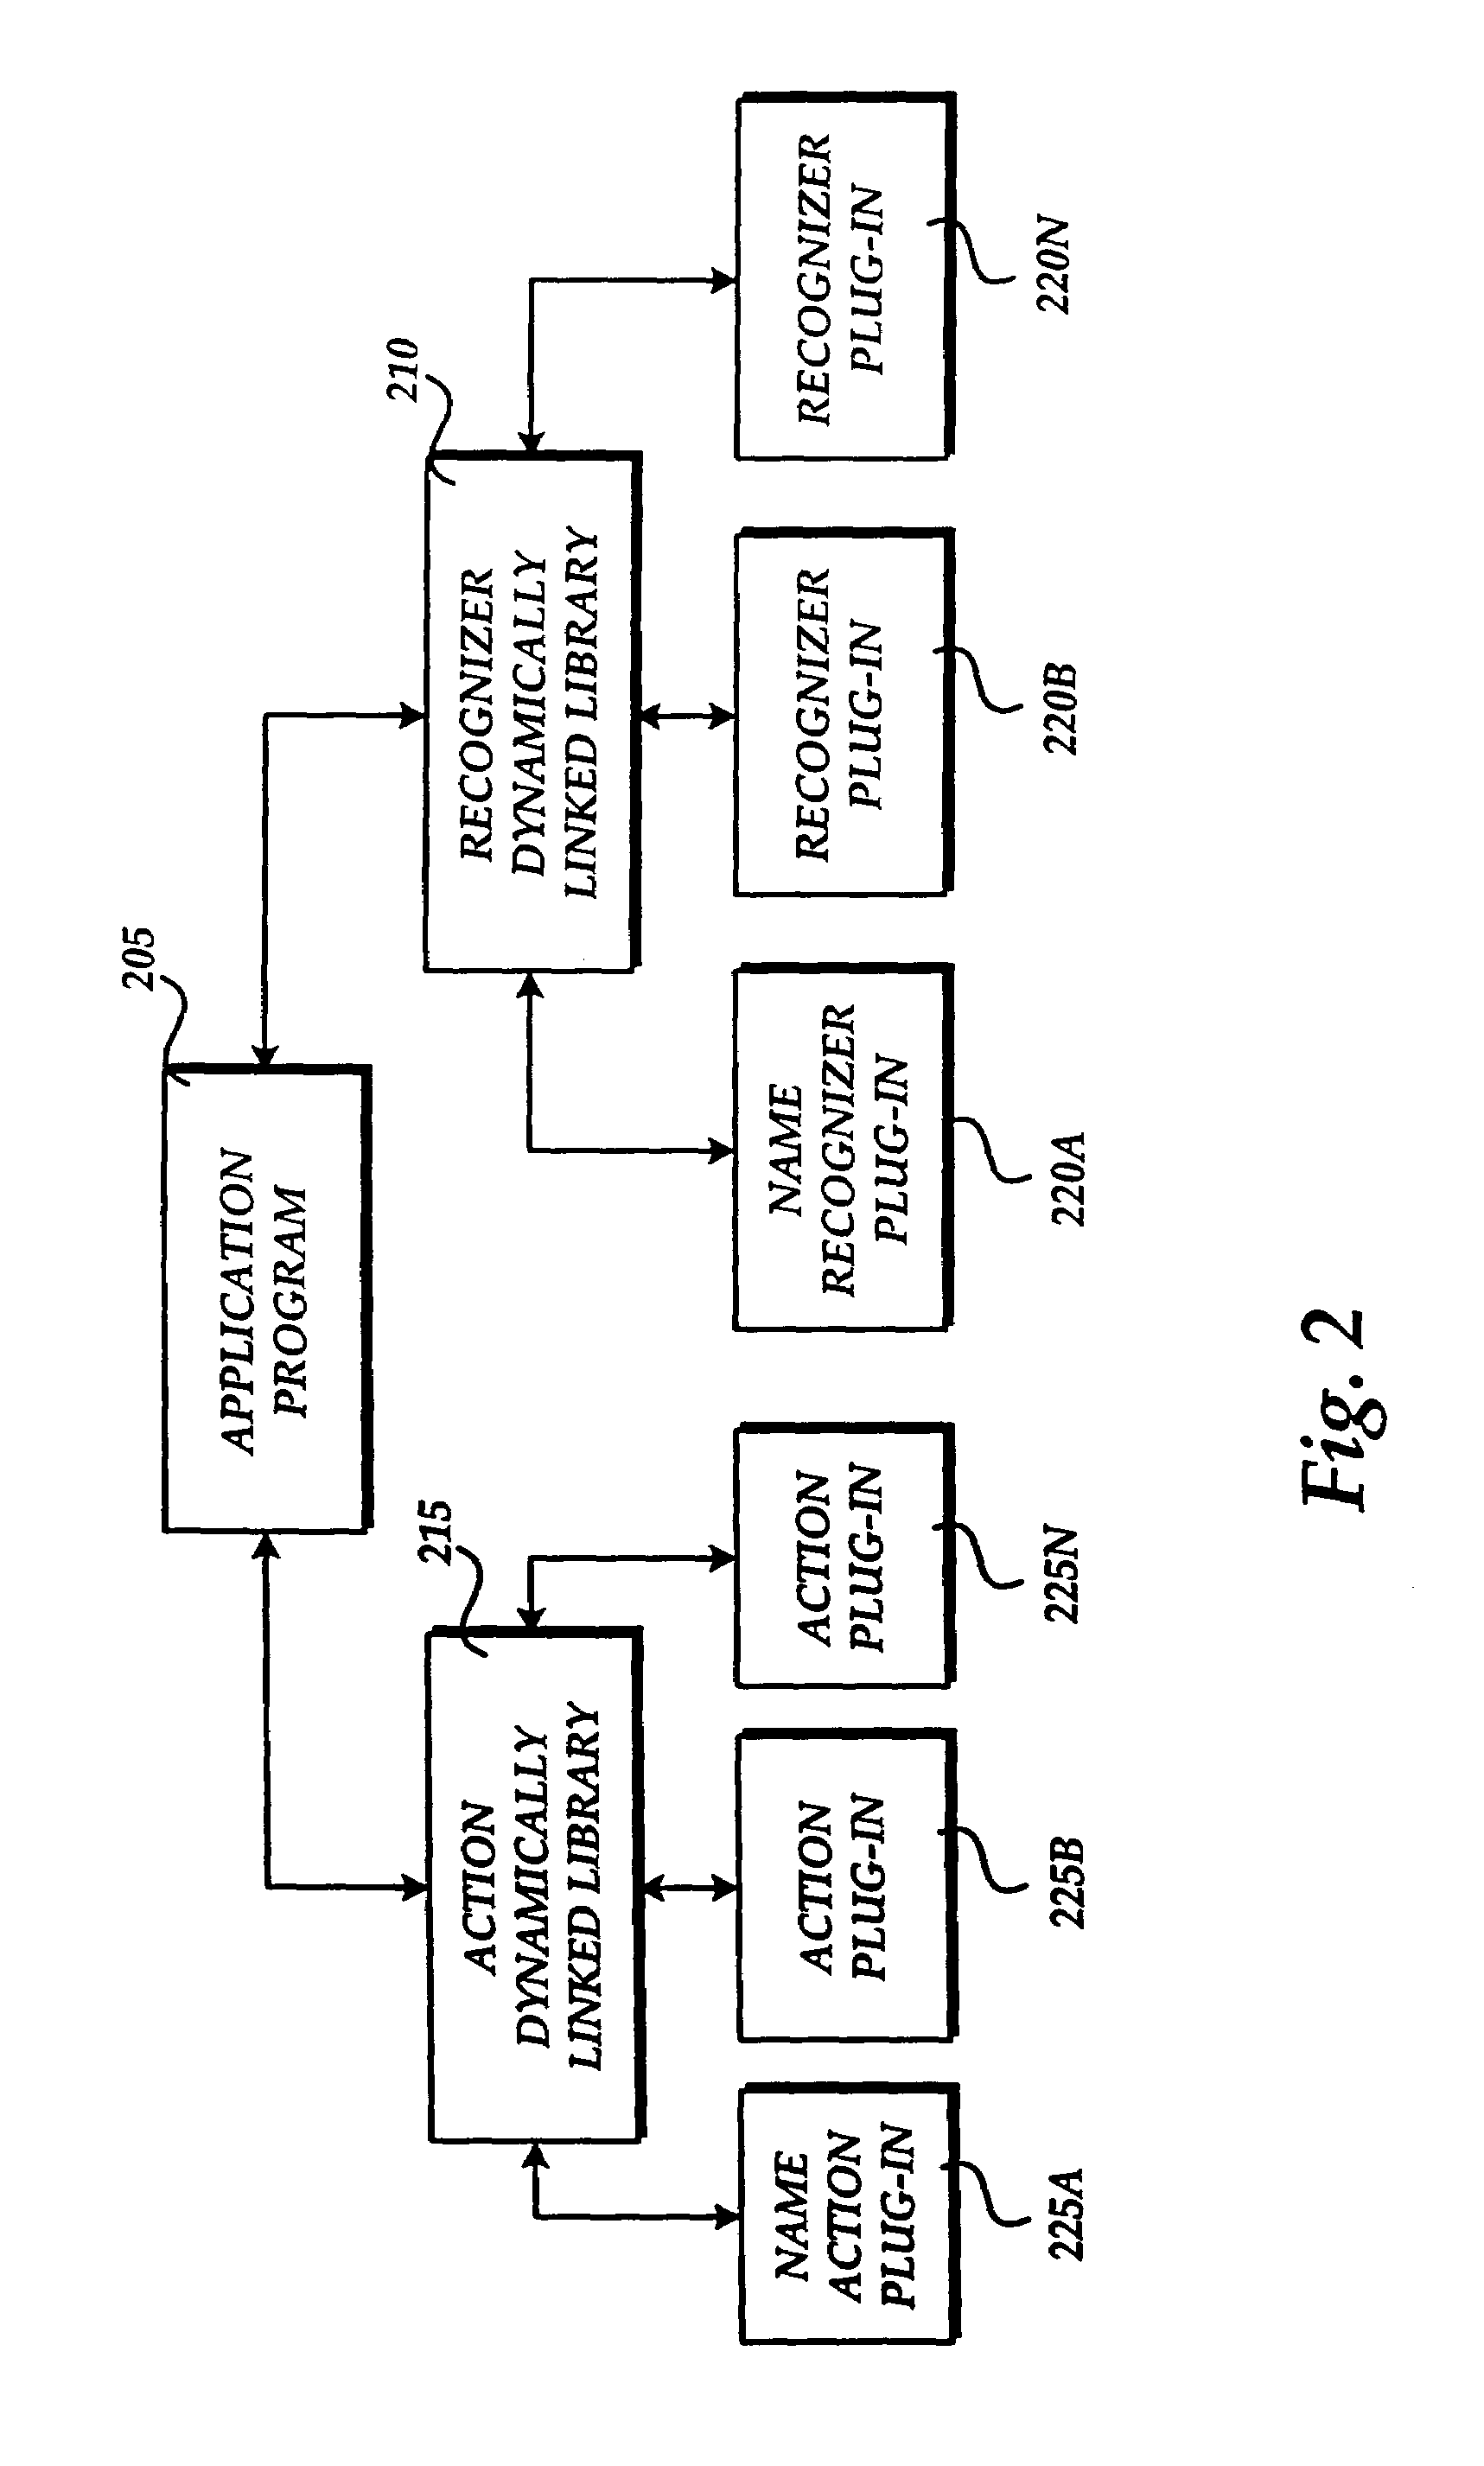 Methods and system for recognizing names in a computer-generated document and for providing helpful actions associated with recognized names